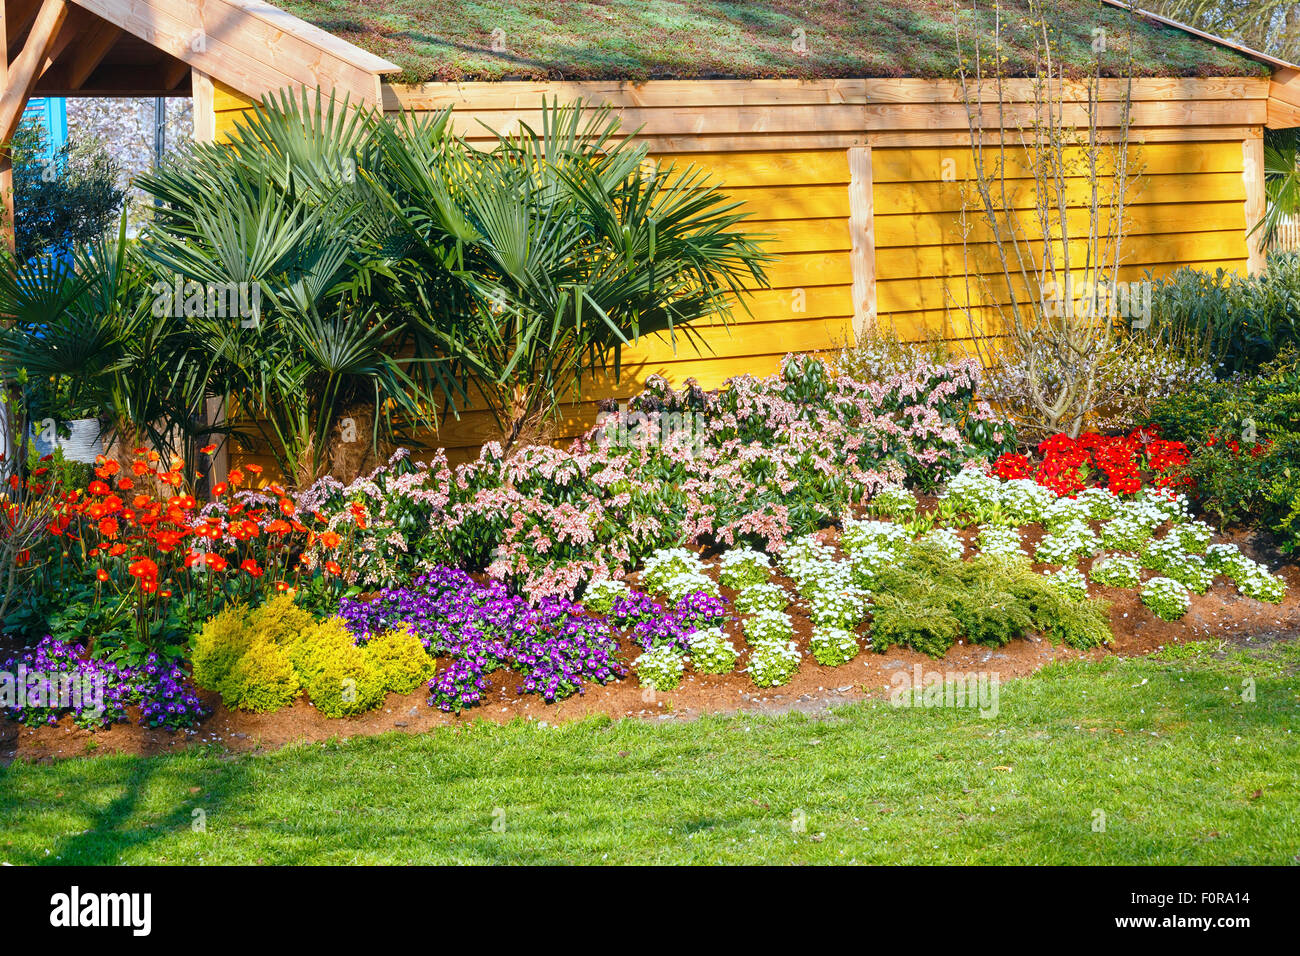 Blossoming varicolored flowerbed near wooden house. Stock Photo